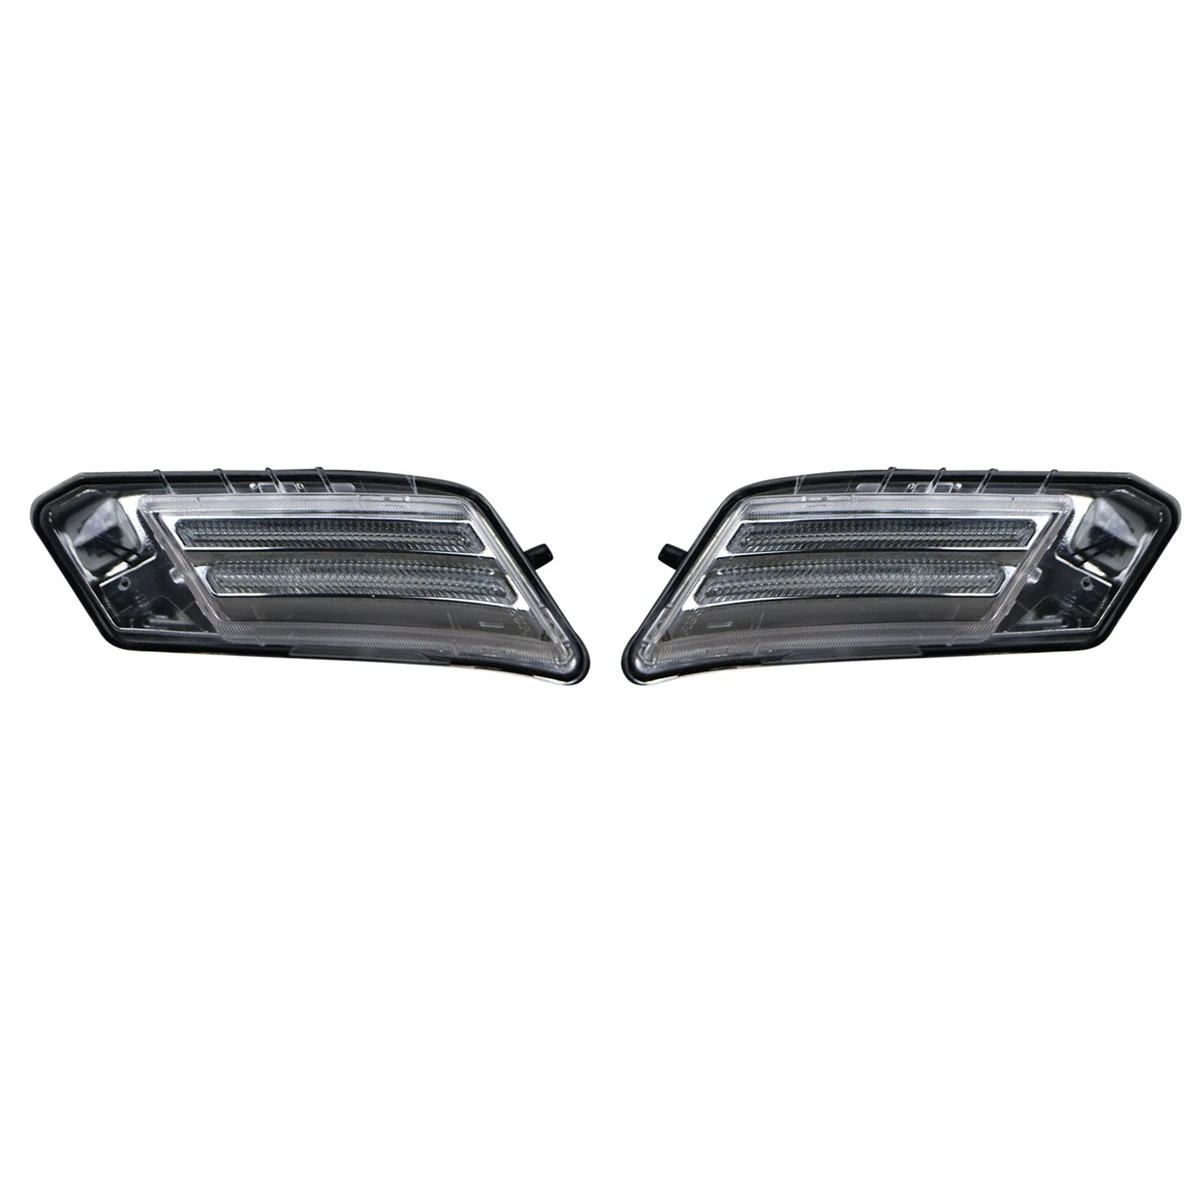 

1Pair Car Left Right Parking Light Front Turn Signal Indicator Light for Volvo XC60 2008-2013 31290874 31290873